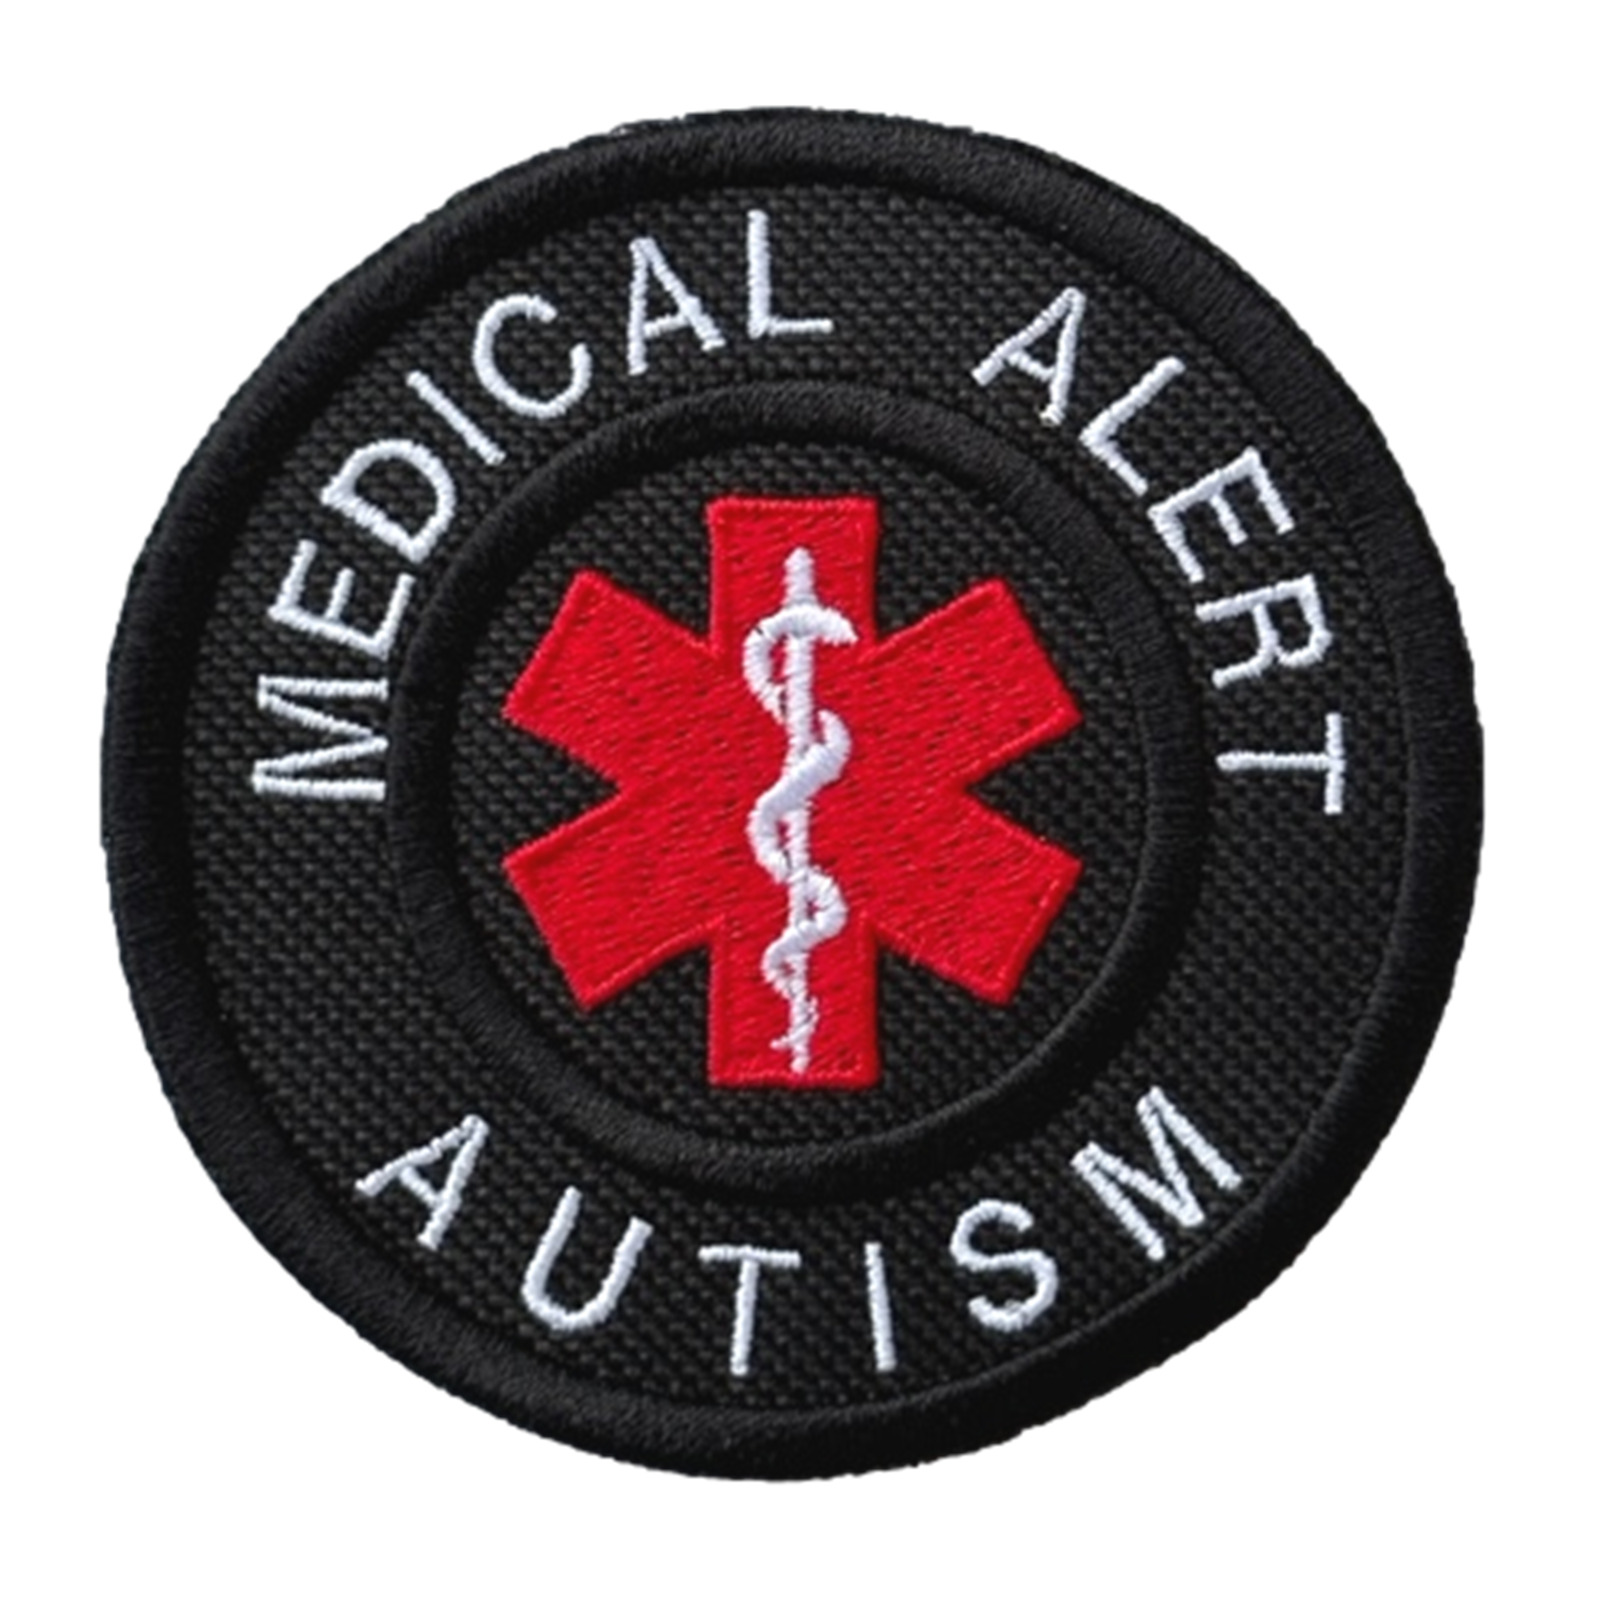 Medical Alert Black - Autism Embroidered Patch Badge (A)